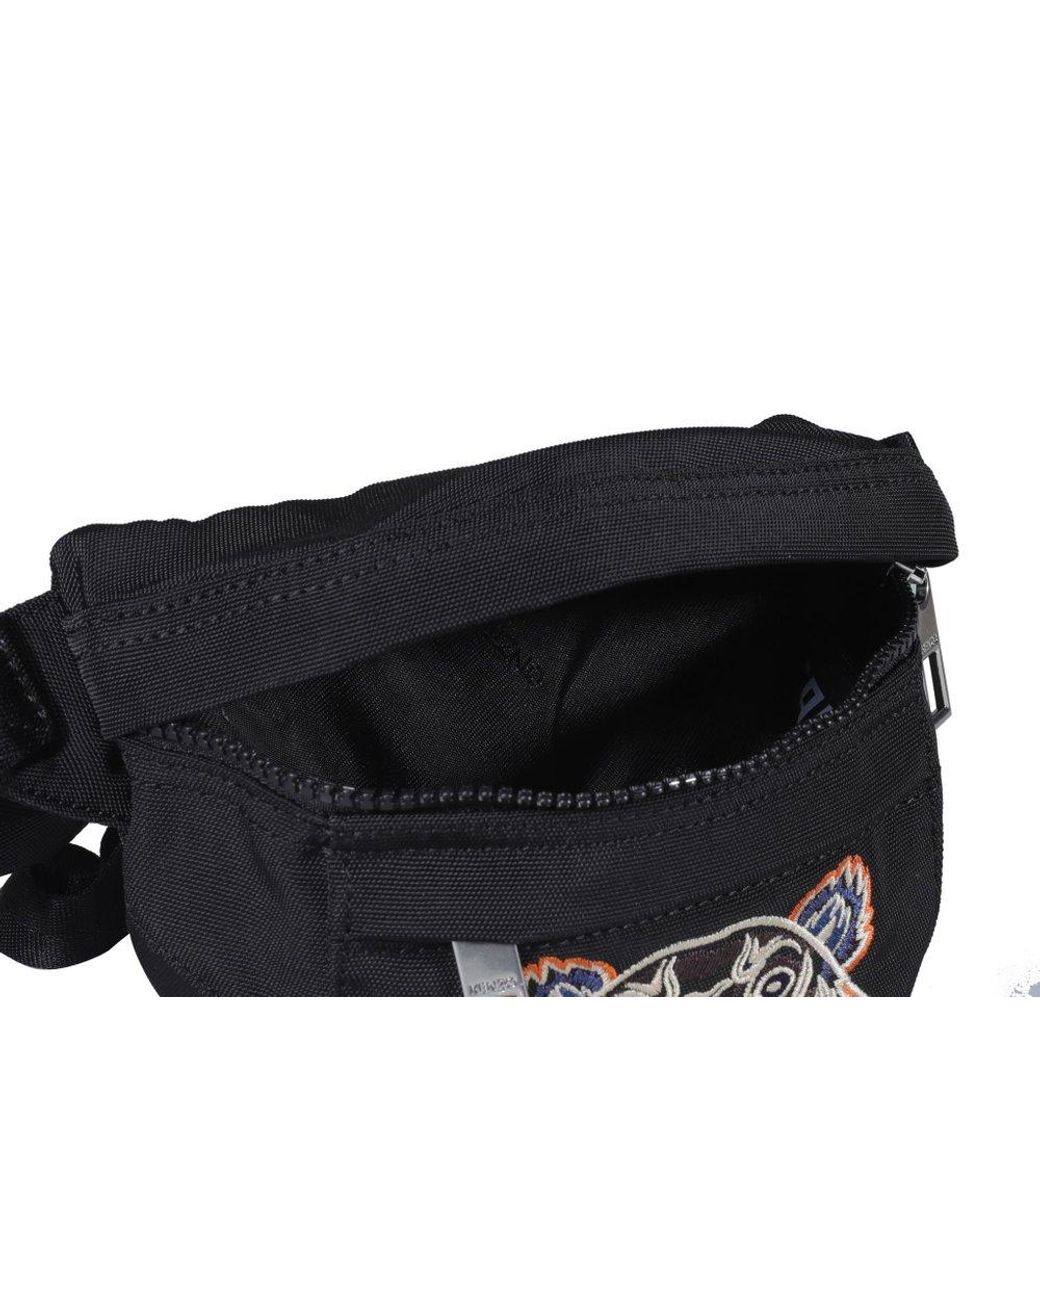 KENZO Tiger Small Bumbag in Black | Lyst